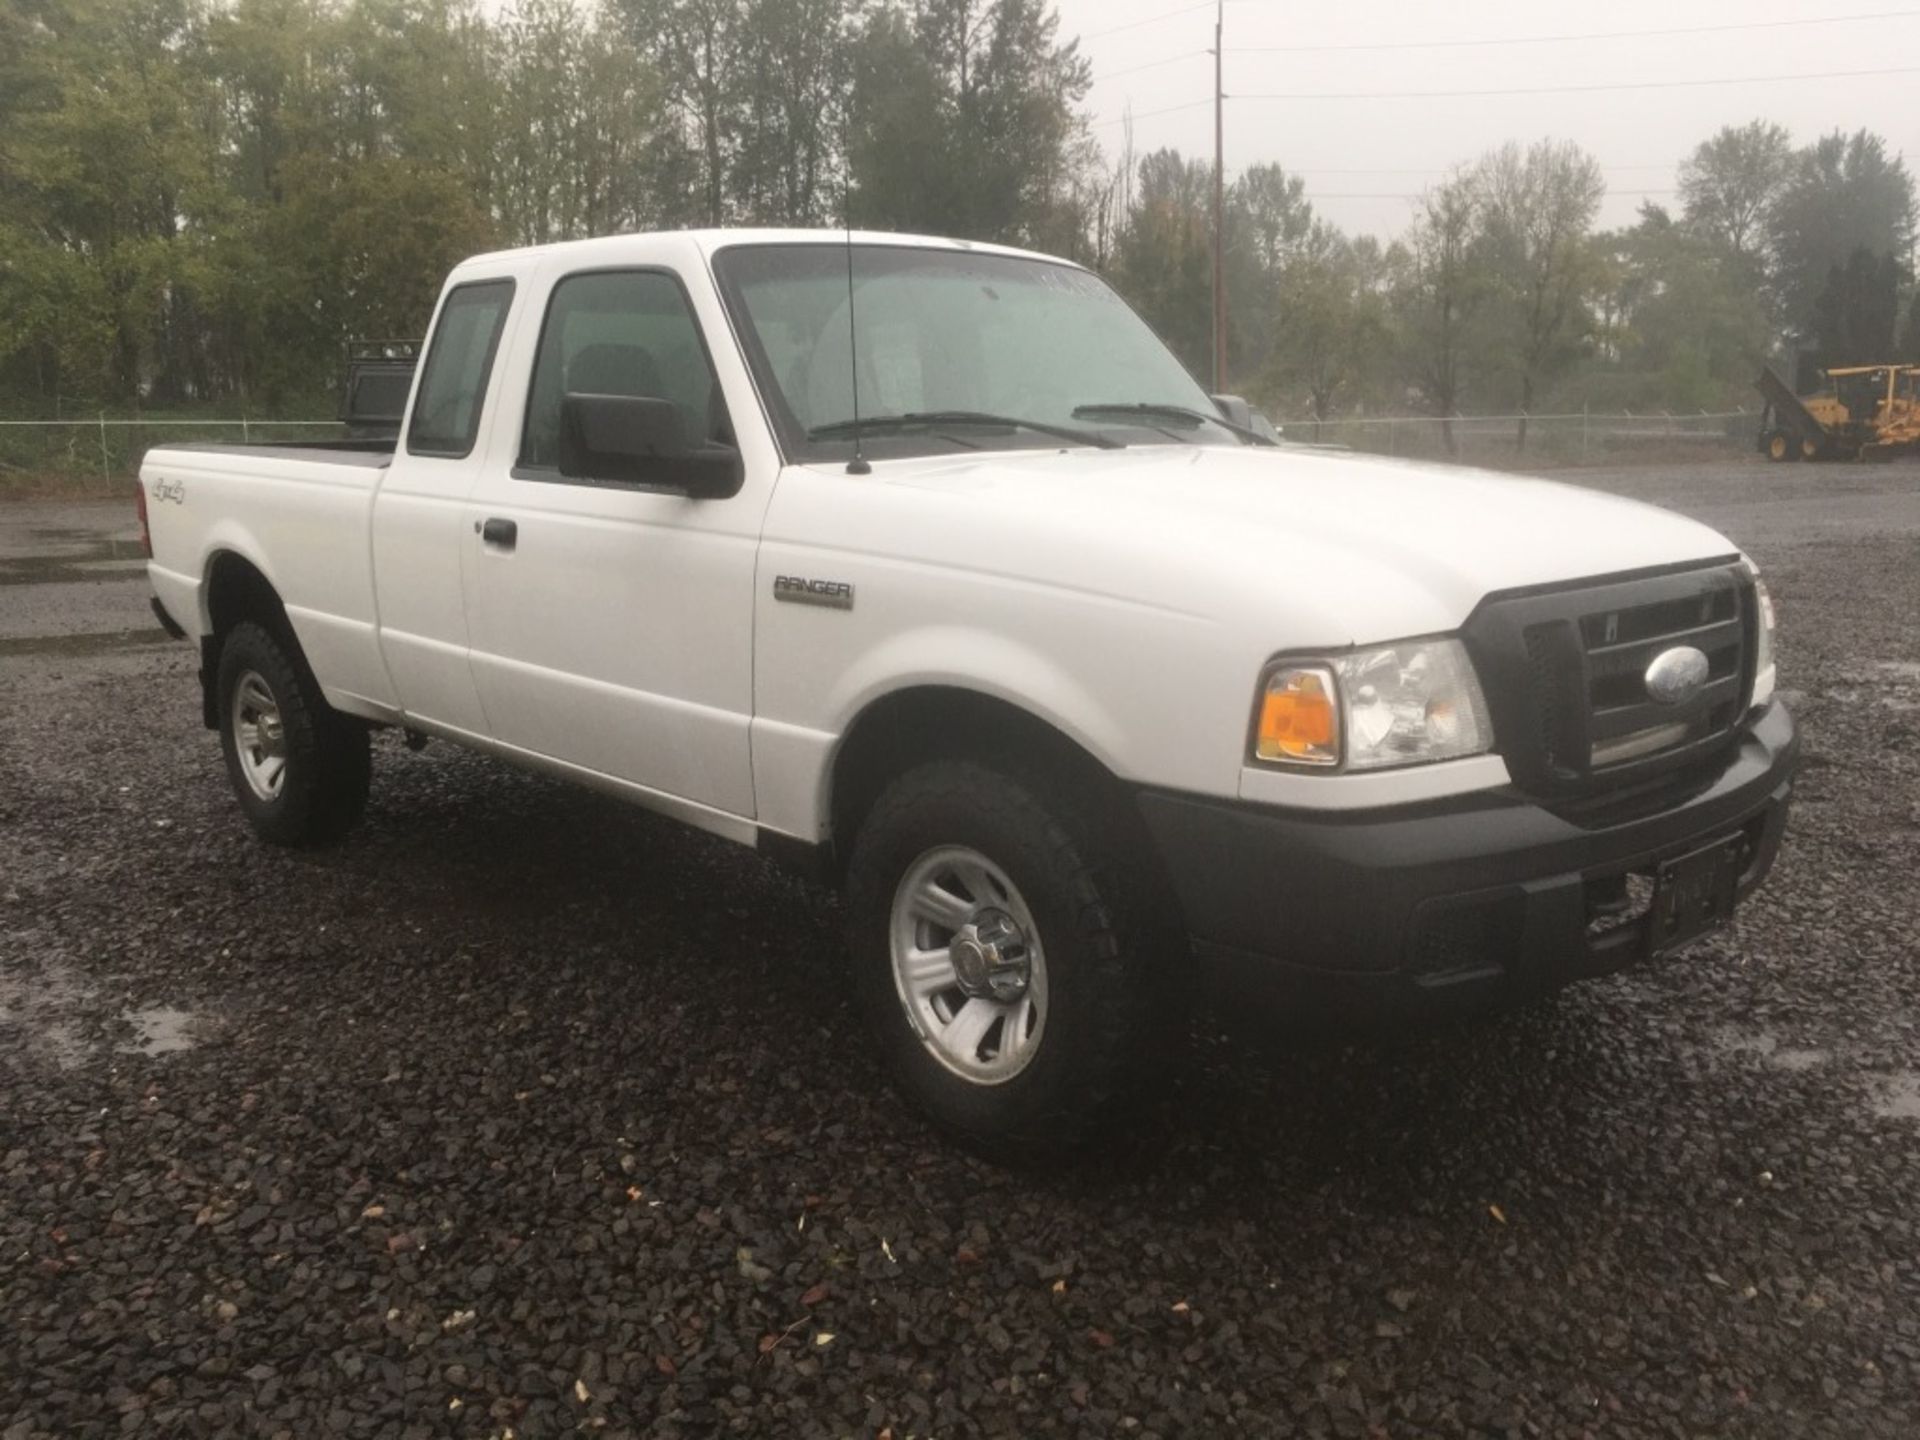 2006 Ford Ranger 4x4 Extra Cab Pickup - Image 2 of 17